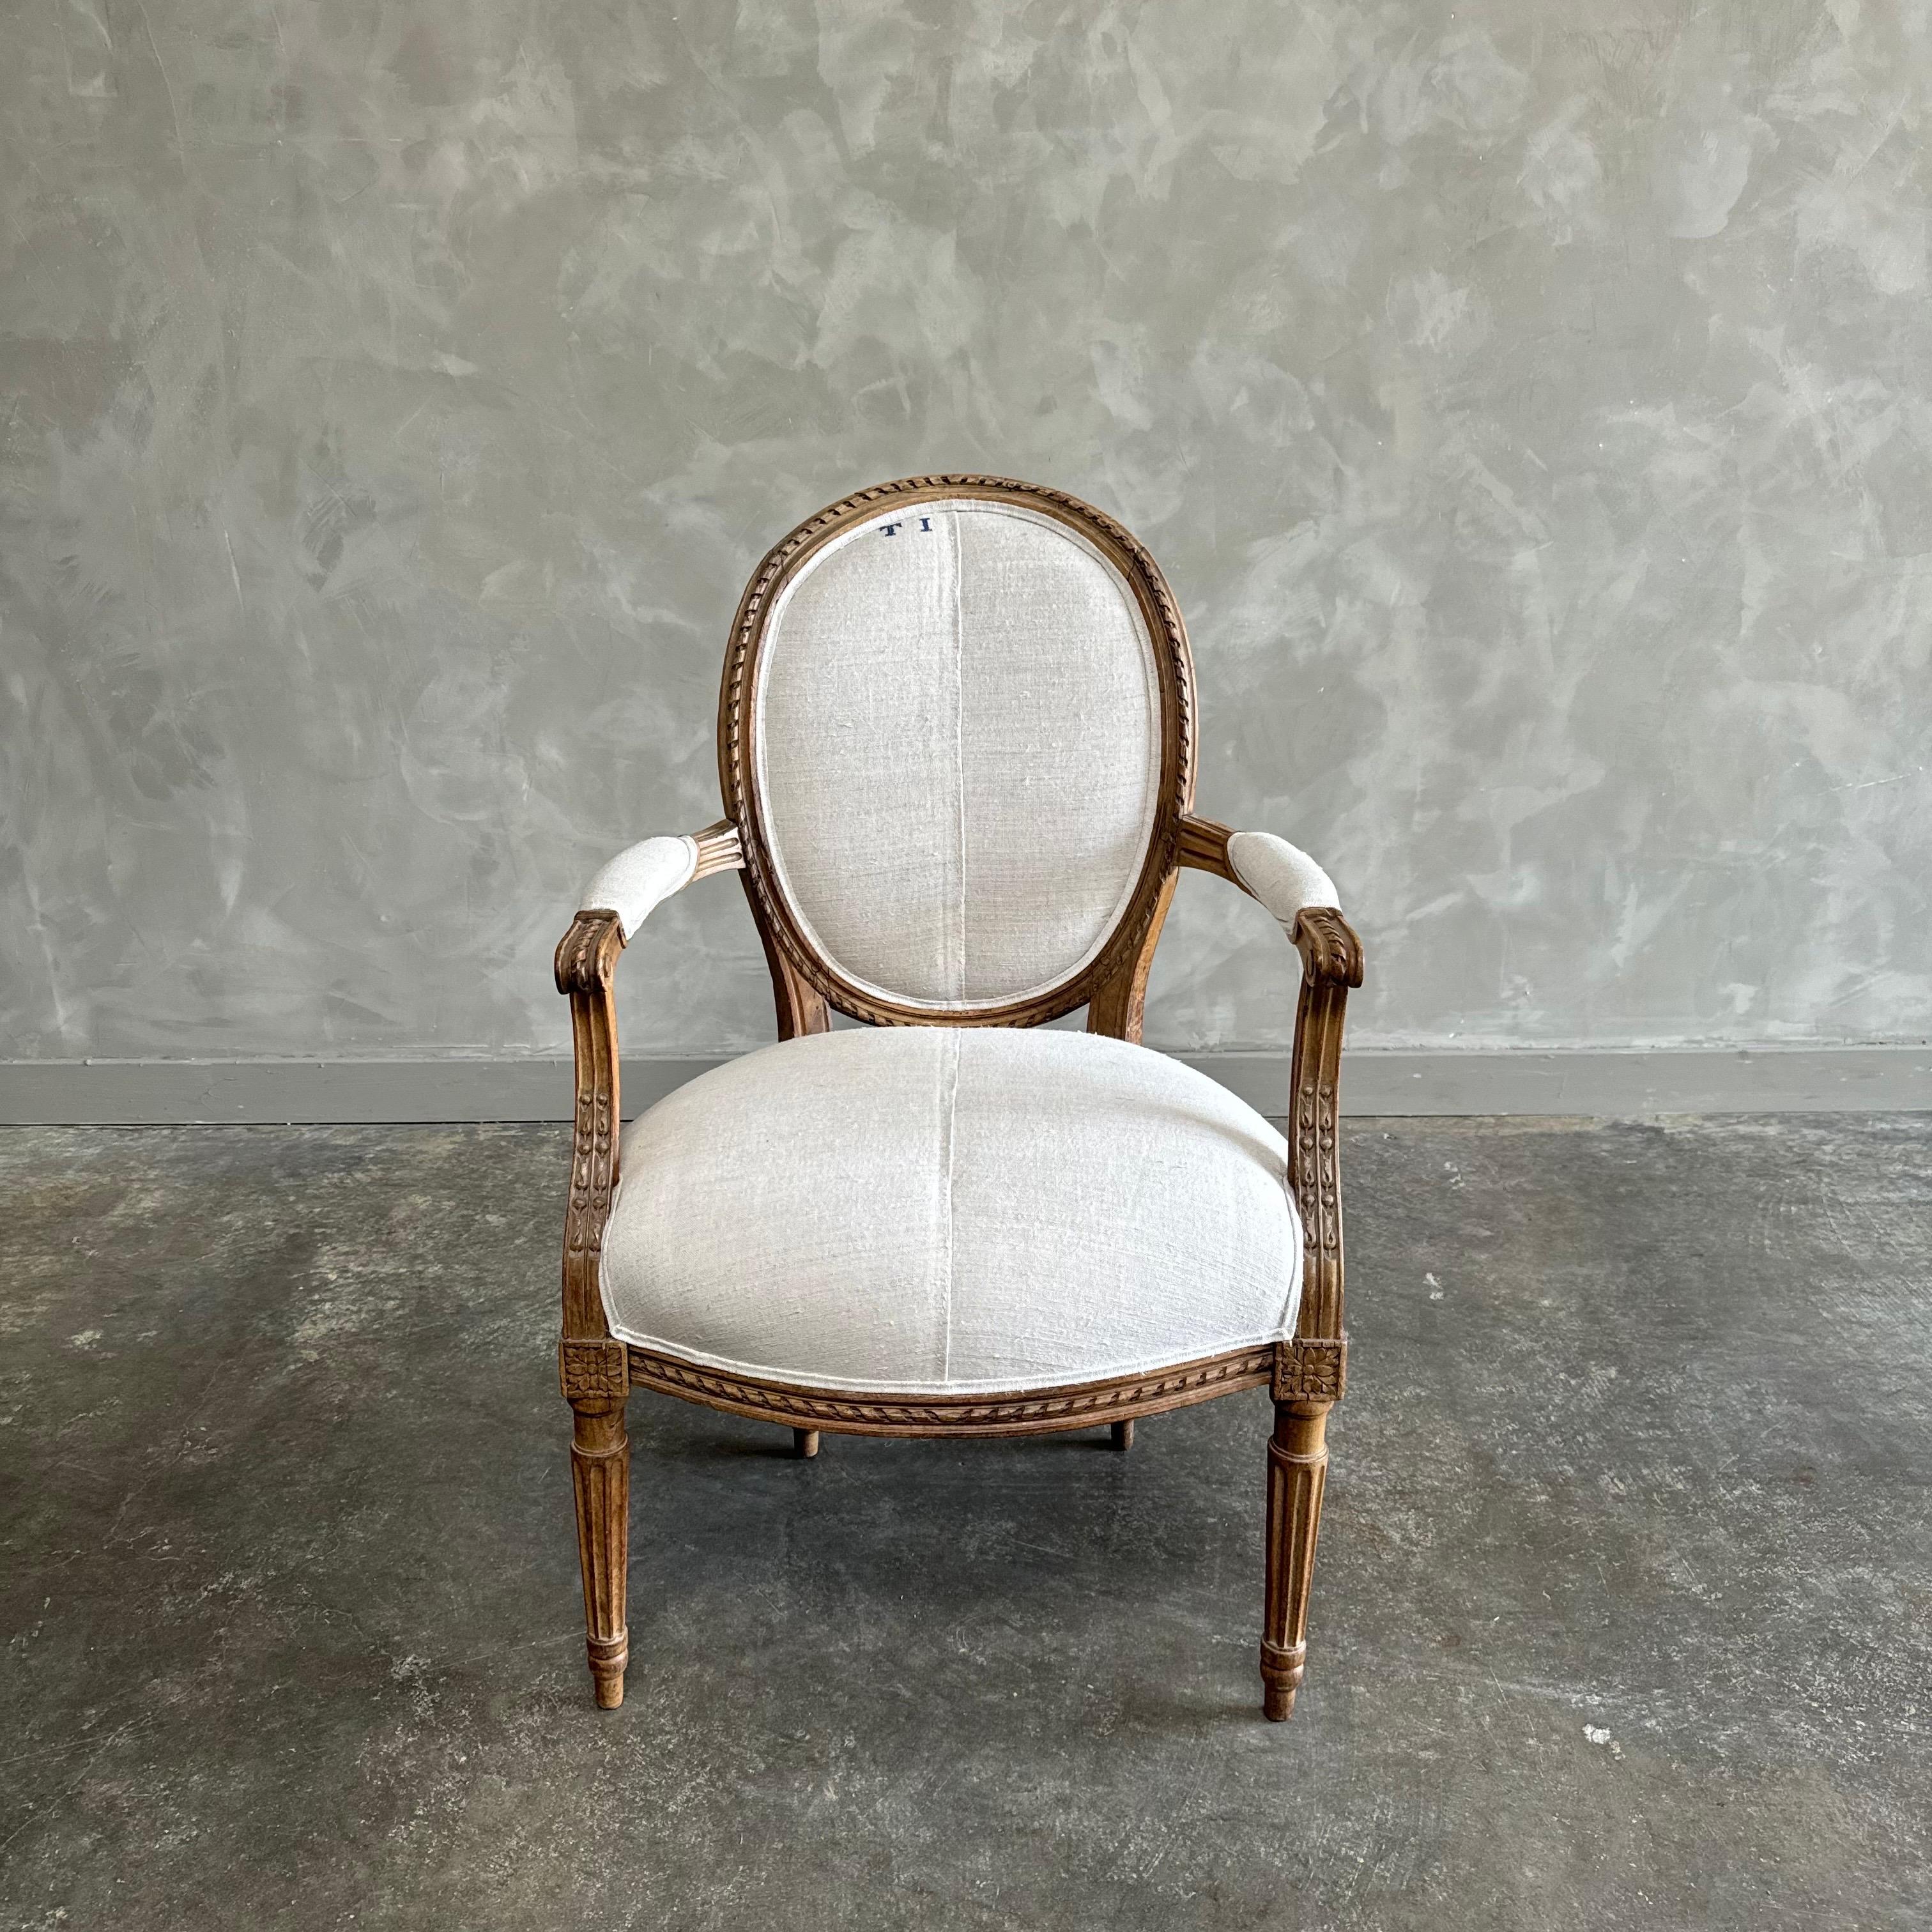 Antique gilt wood open arm chair upholstered in natural grain sack. This vintage chair has the original finish, which is a weathered patina gilt wood. We have reupholstered them in a thick, nubby grain sack that is soft to the hand. Solid and